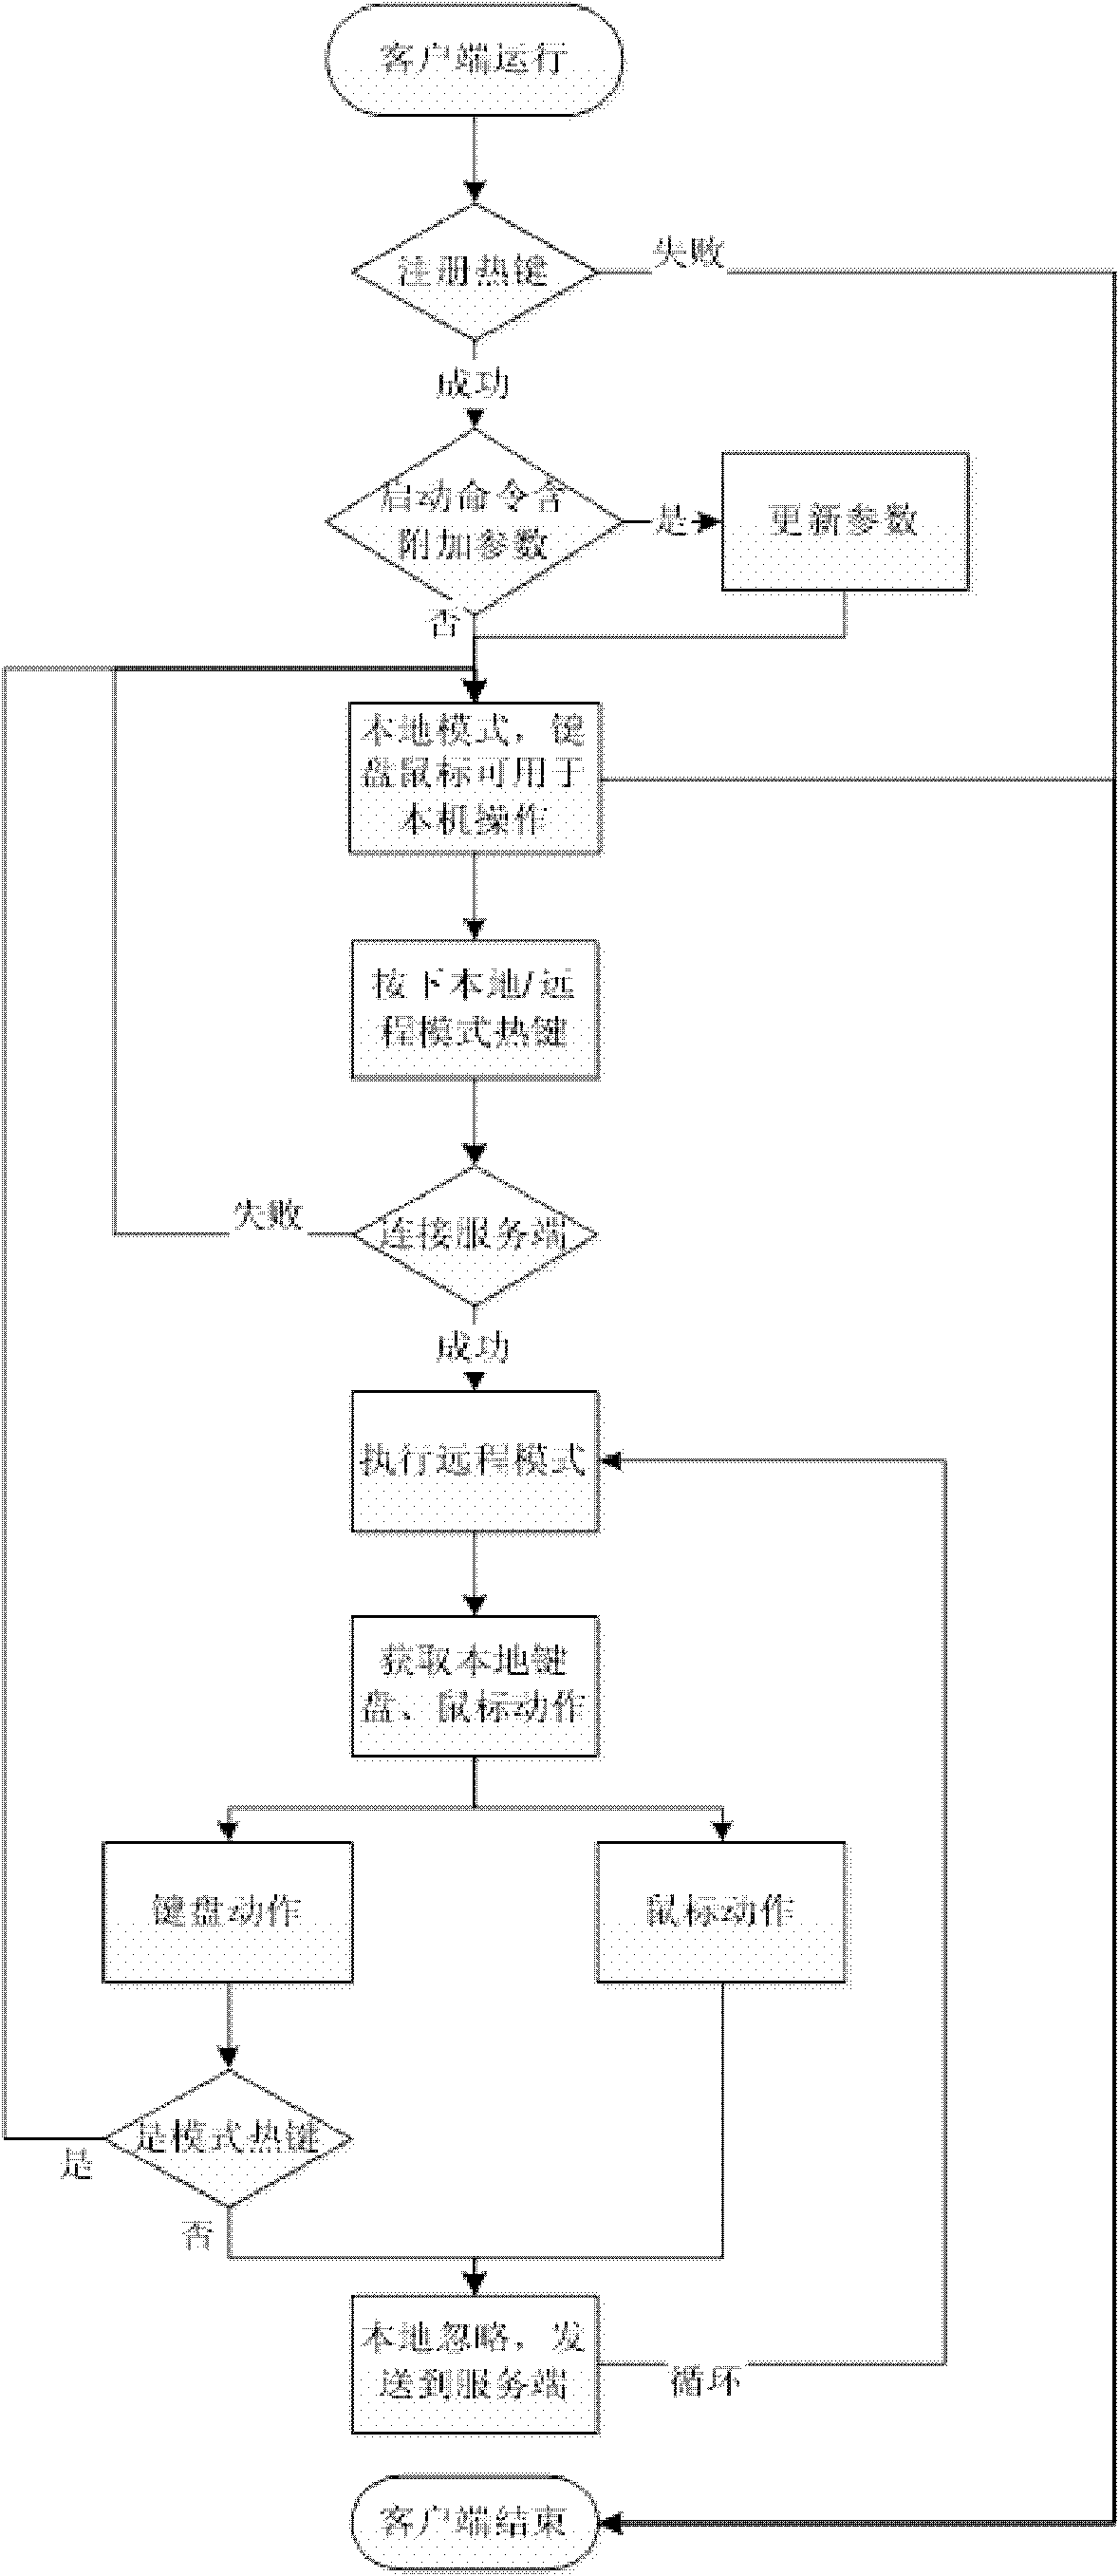 Remote multi-keyboard mouse control method for network computer